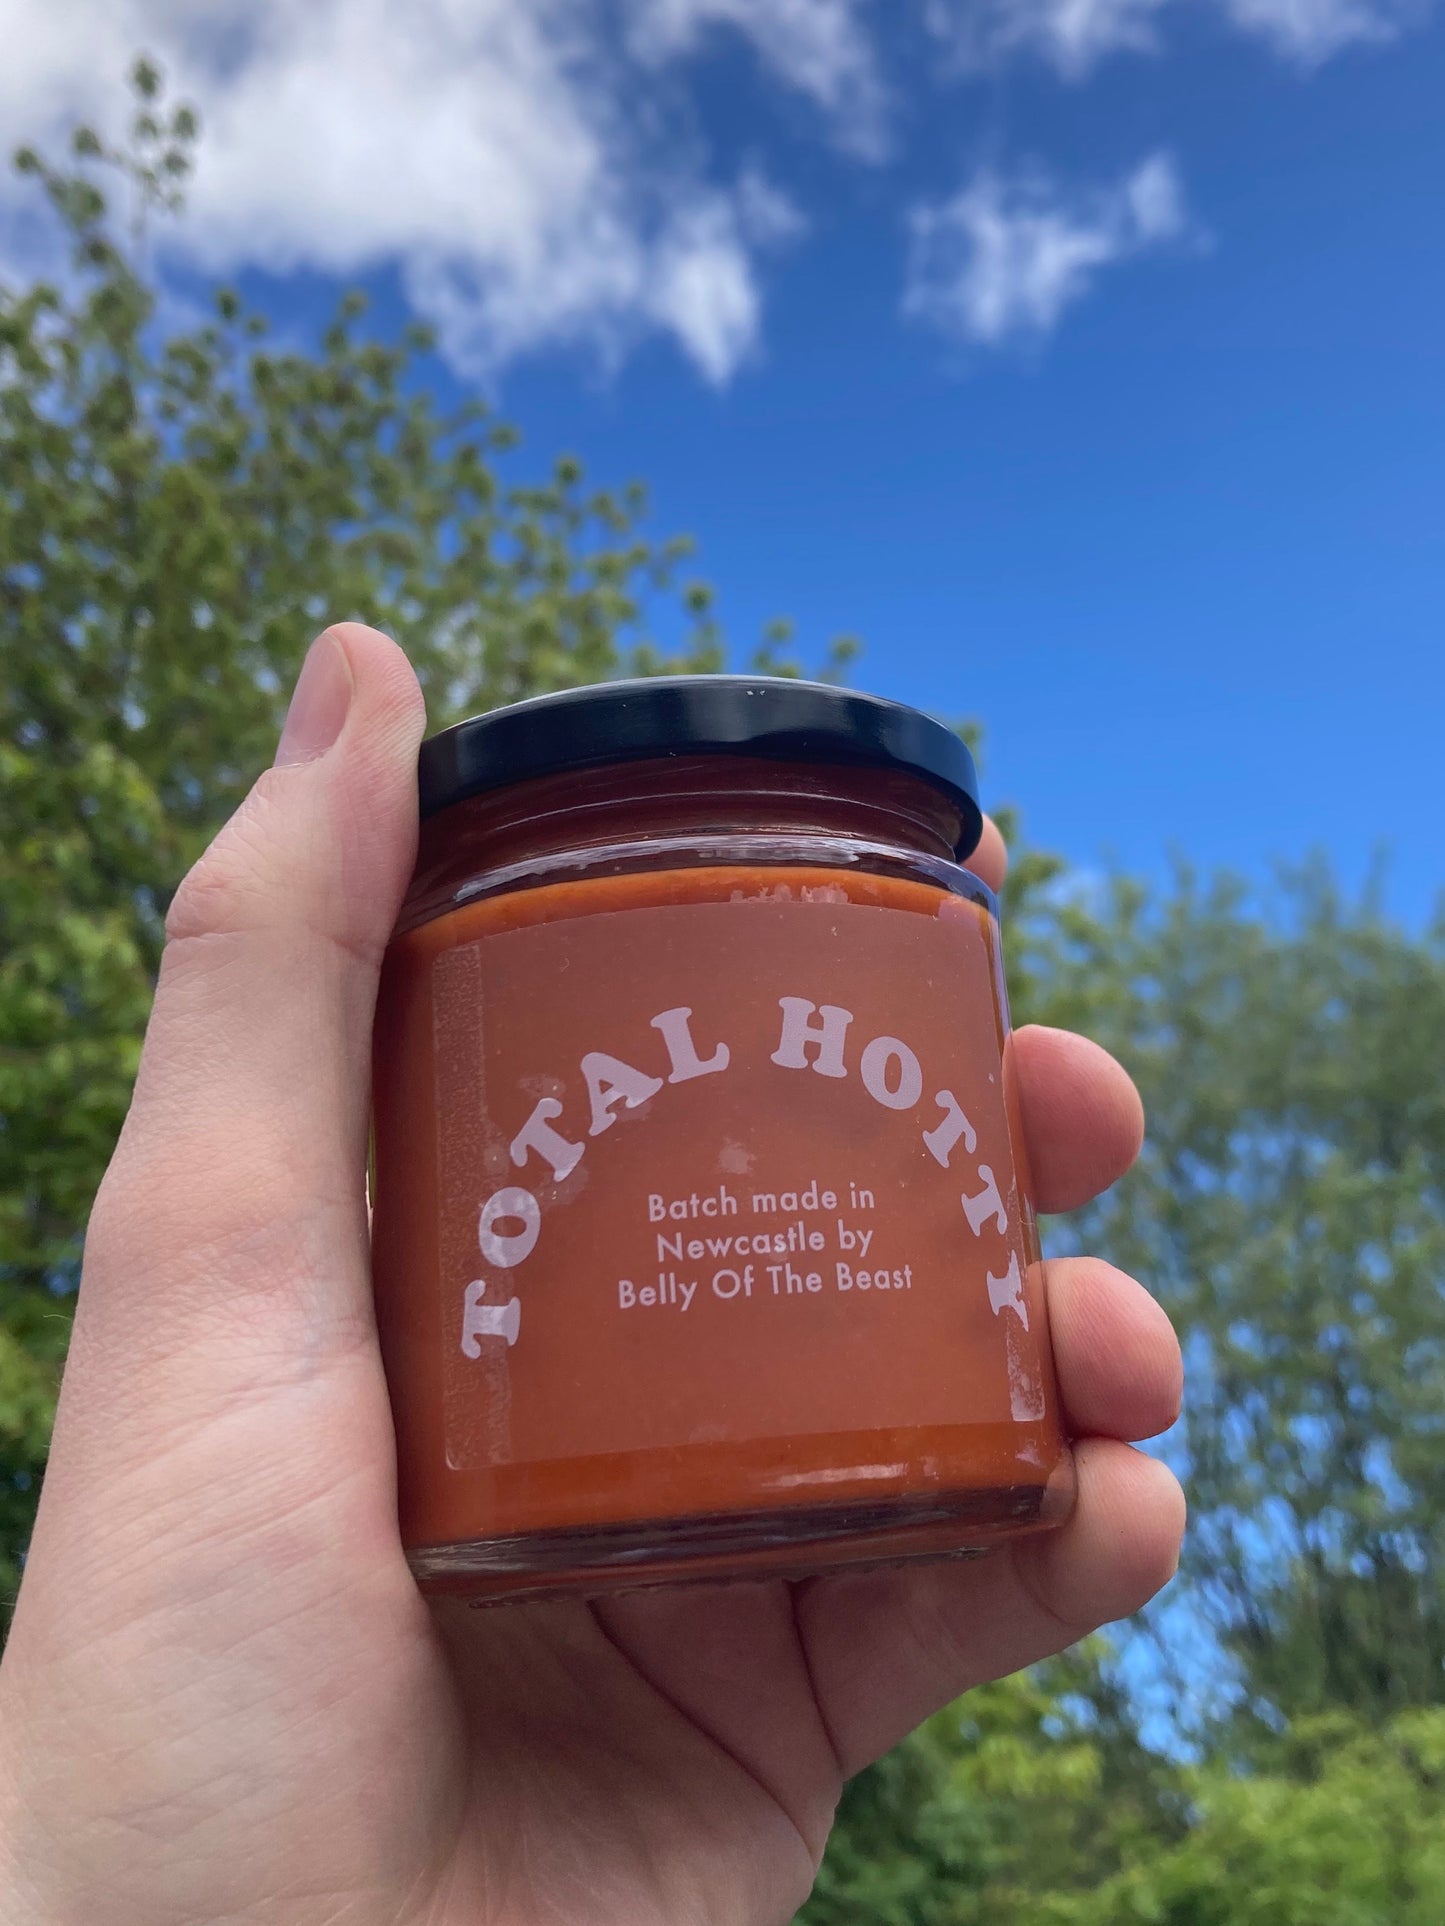 “Total Hotty” - Fermented Chilli Hot Sauce